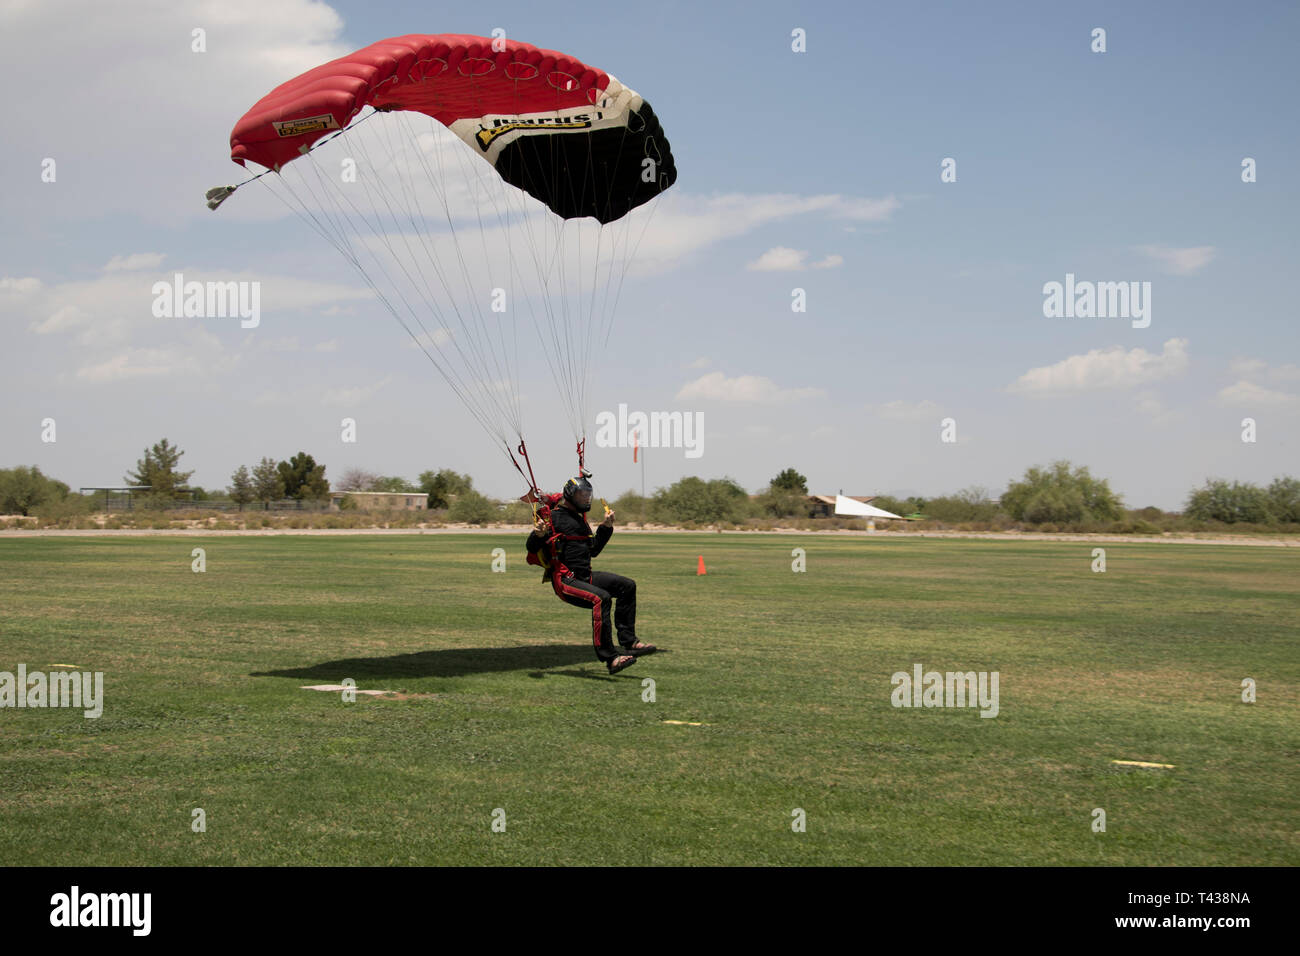 Man flying parachute after sport skydiving. Close up of skydiver flying parachute in the summer. Stock Photo